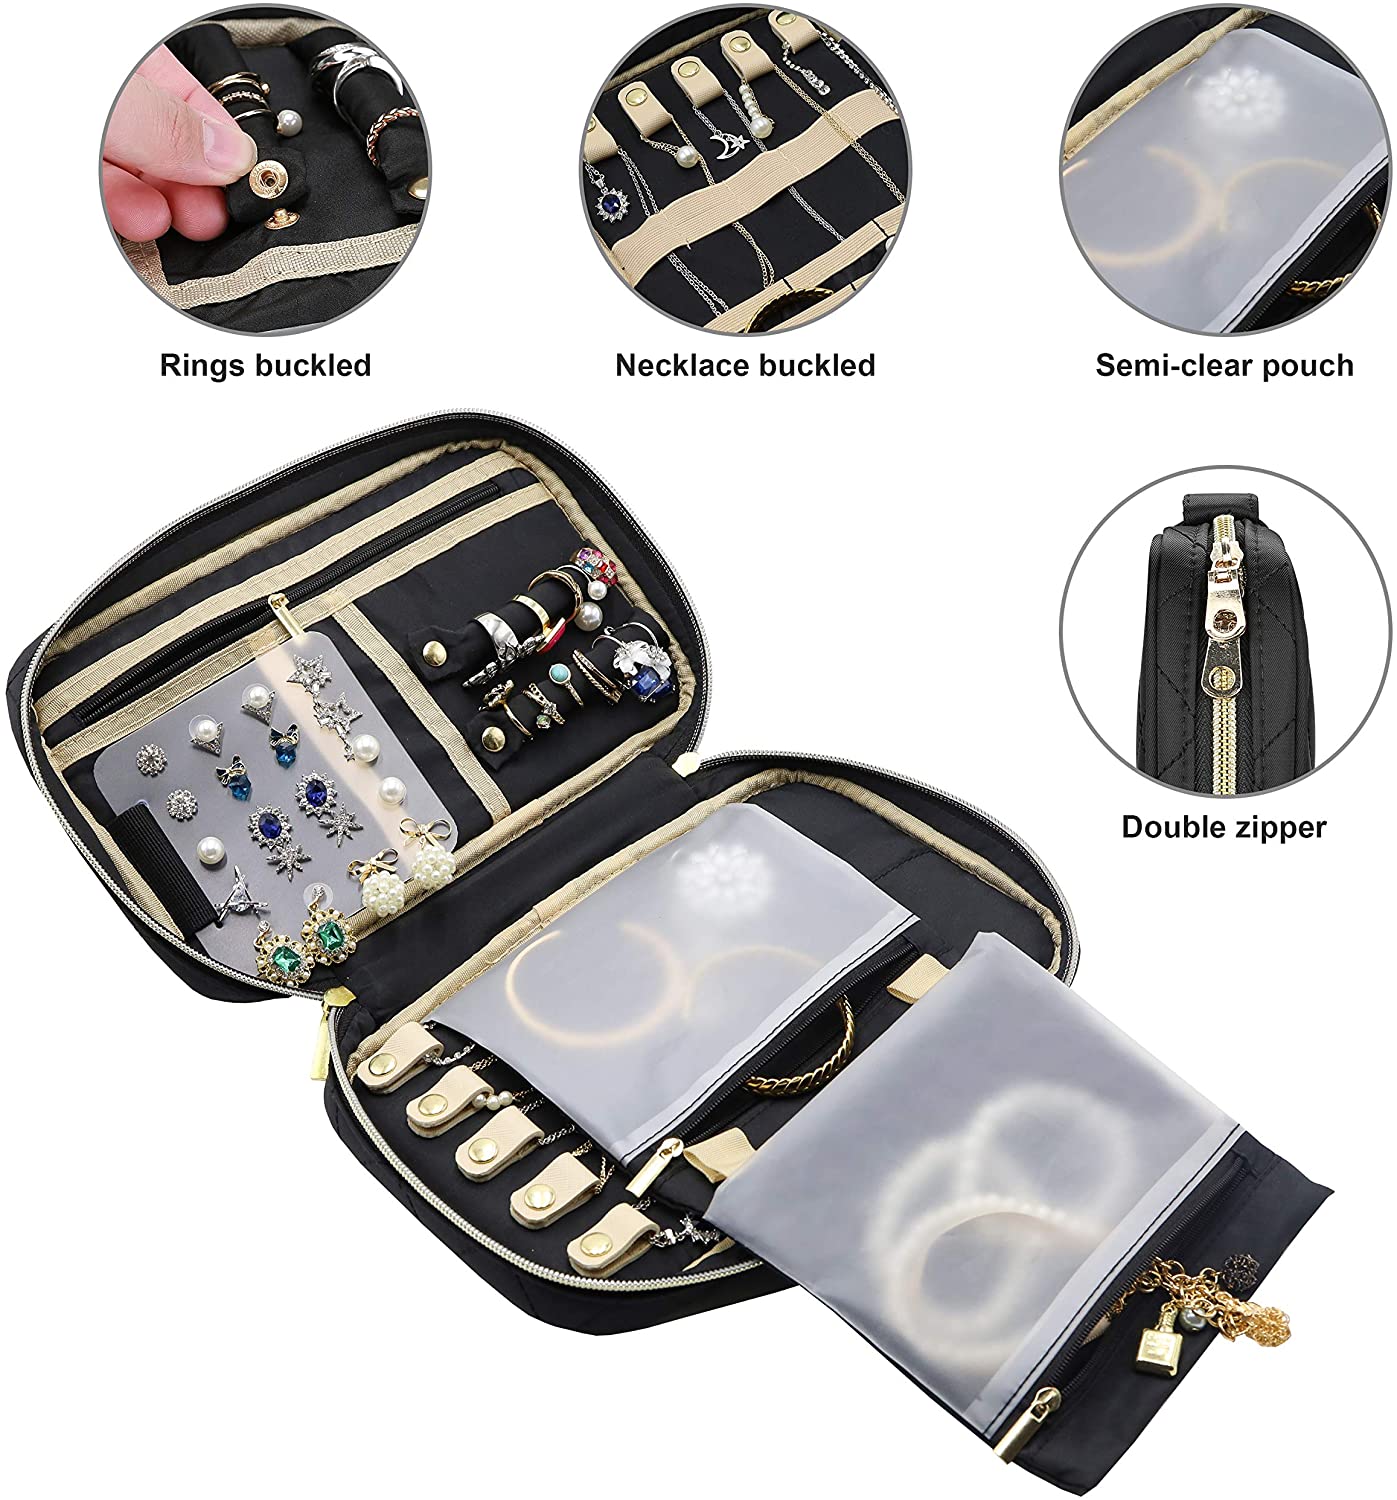 Teamoy Travel Jewelry Roll, Jewelry Storage Bag Organizer for Necklaces,  Earrings, Bracelets, Rings, Brooches and More, Compact